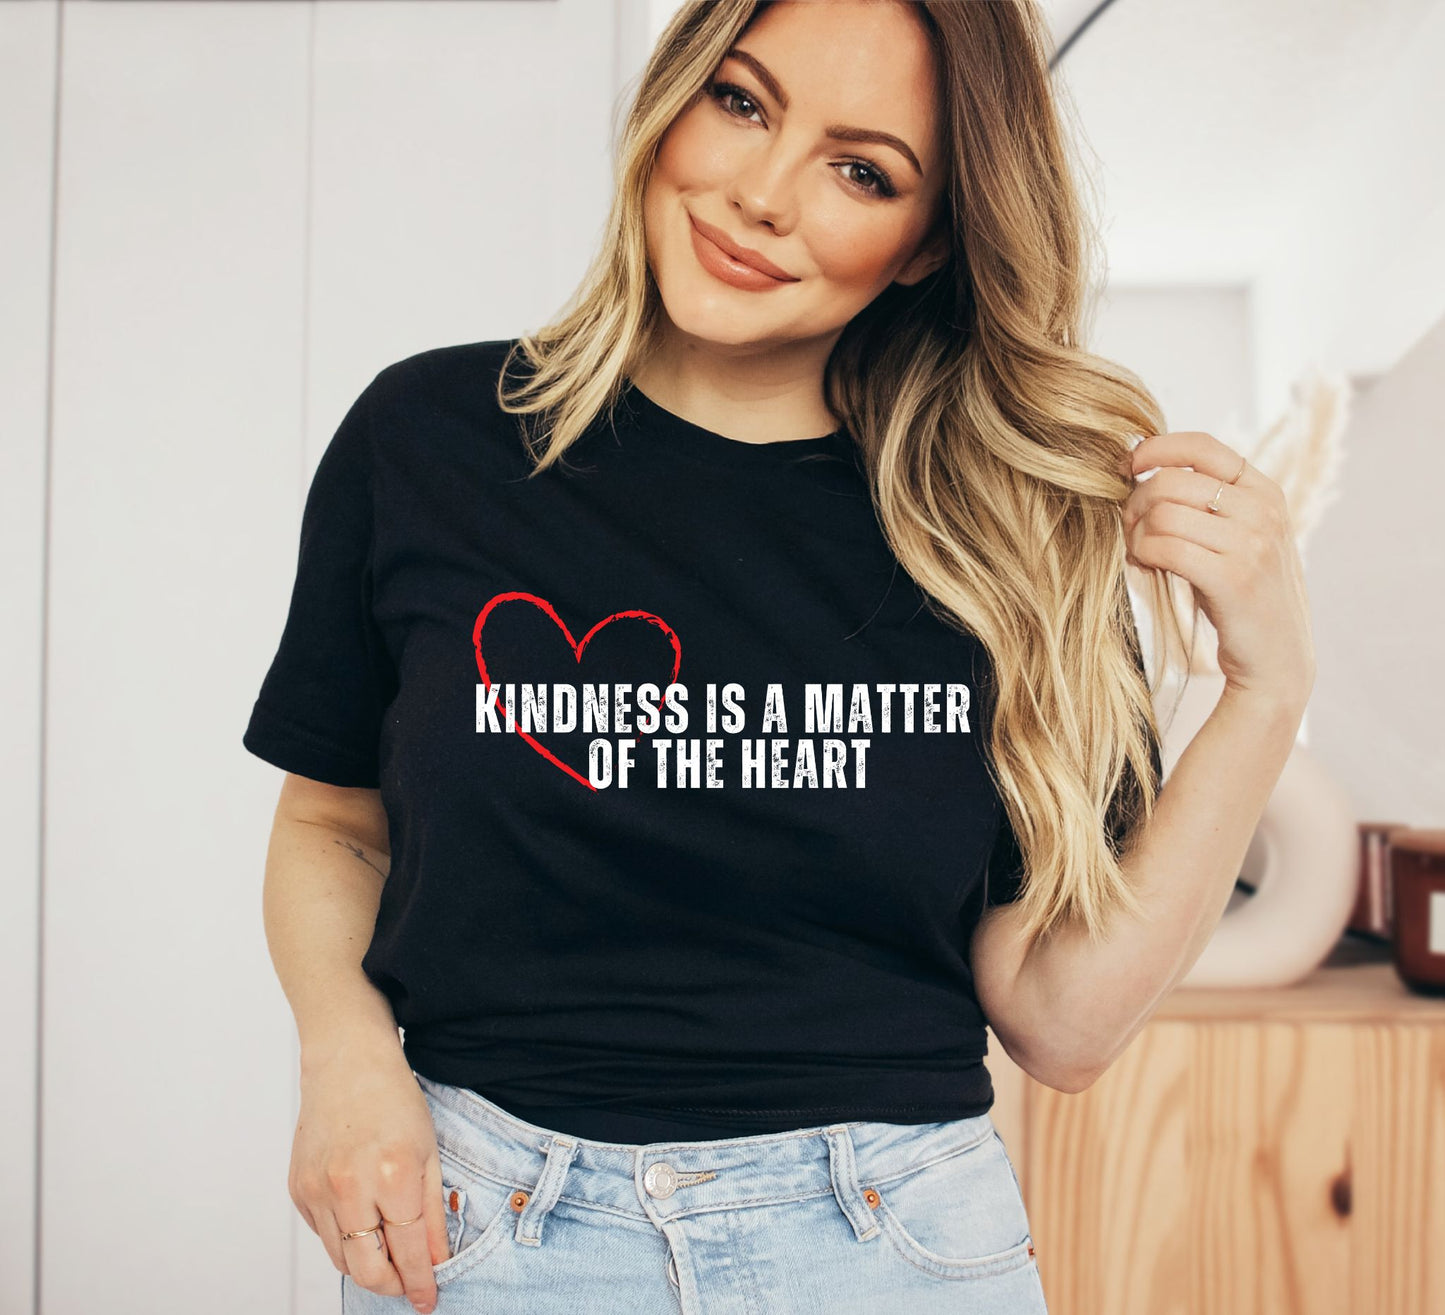 Kindness is a Matter of the Heart T-Shirt - I Heart You